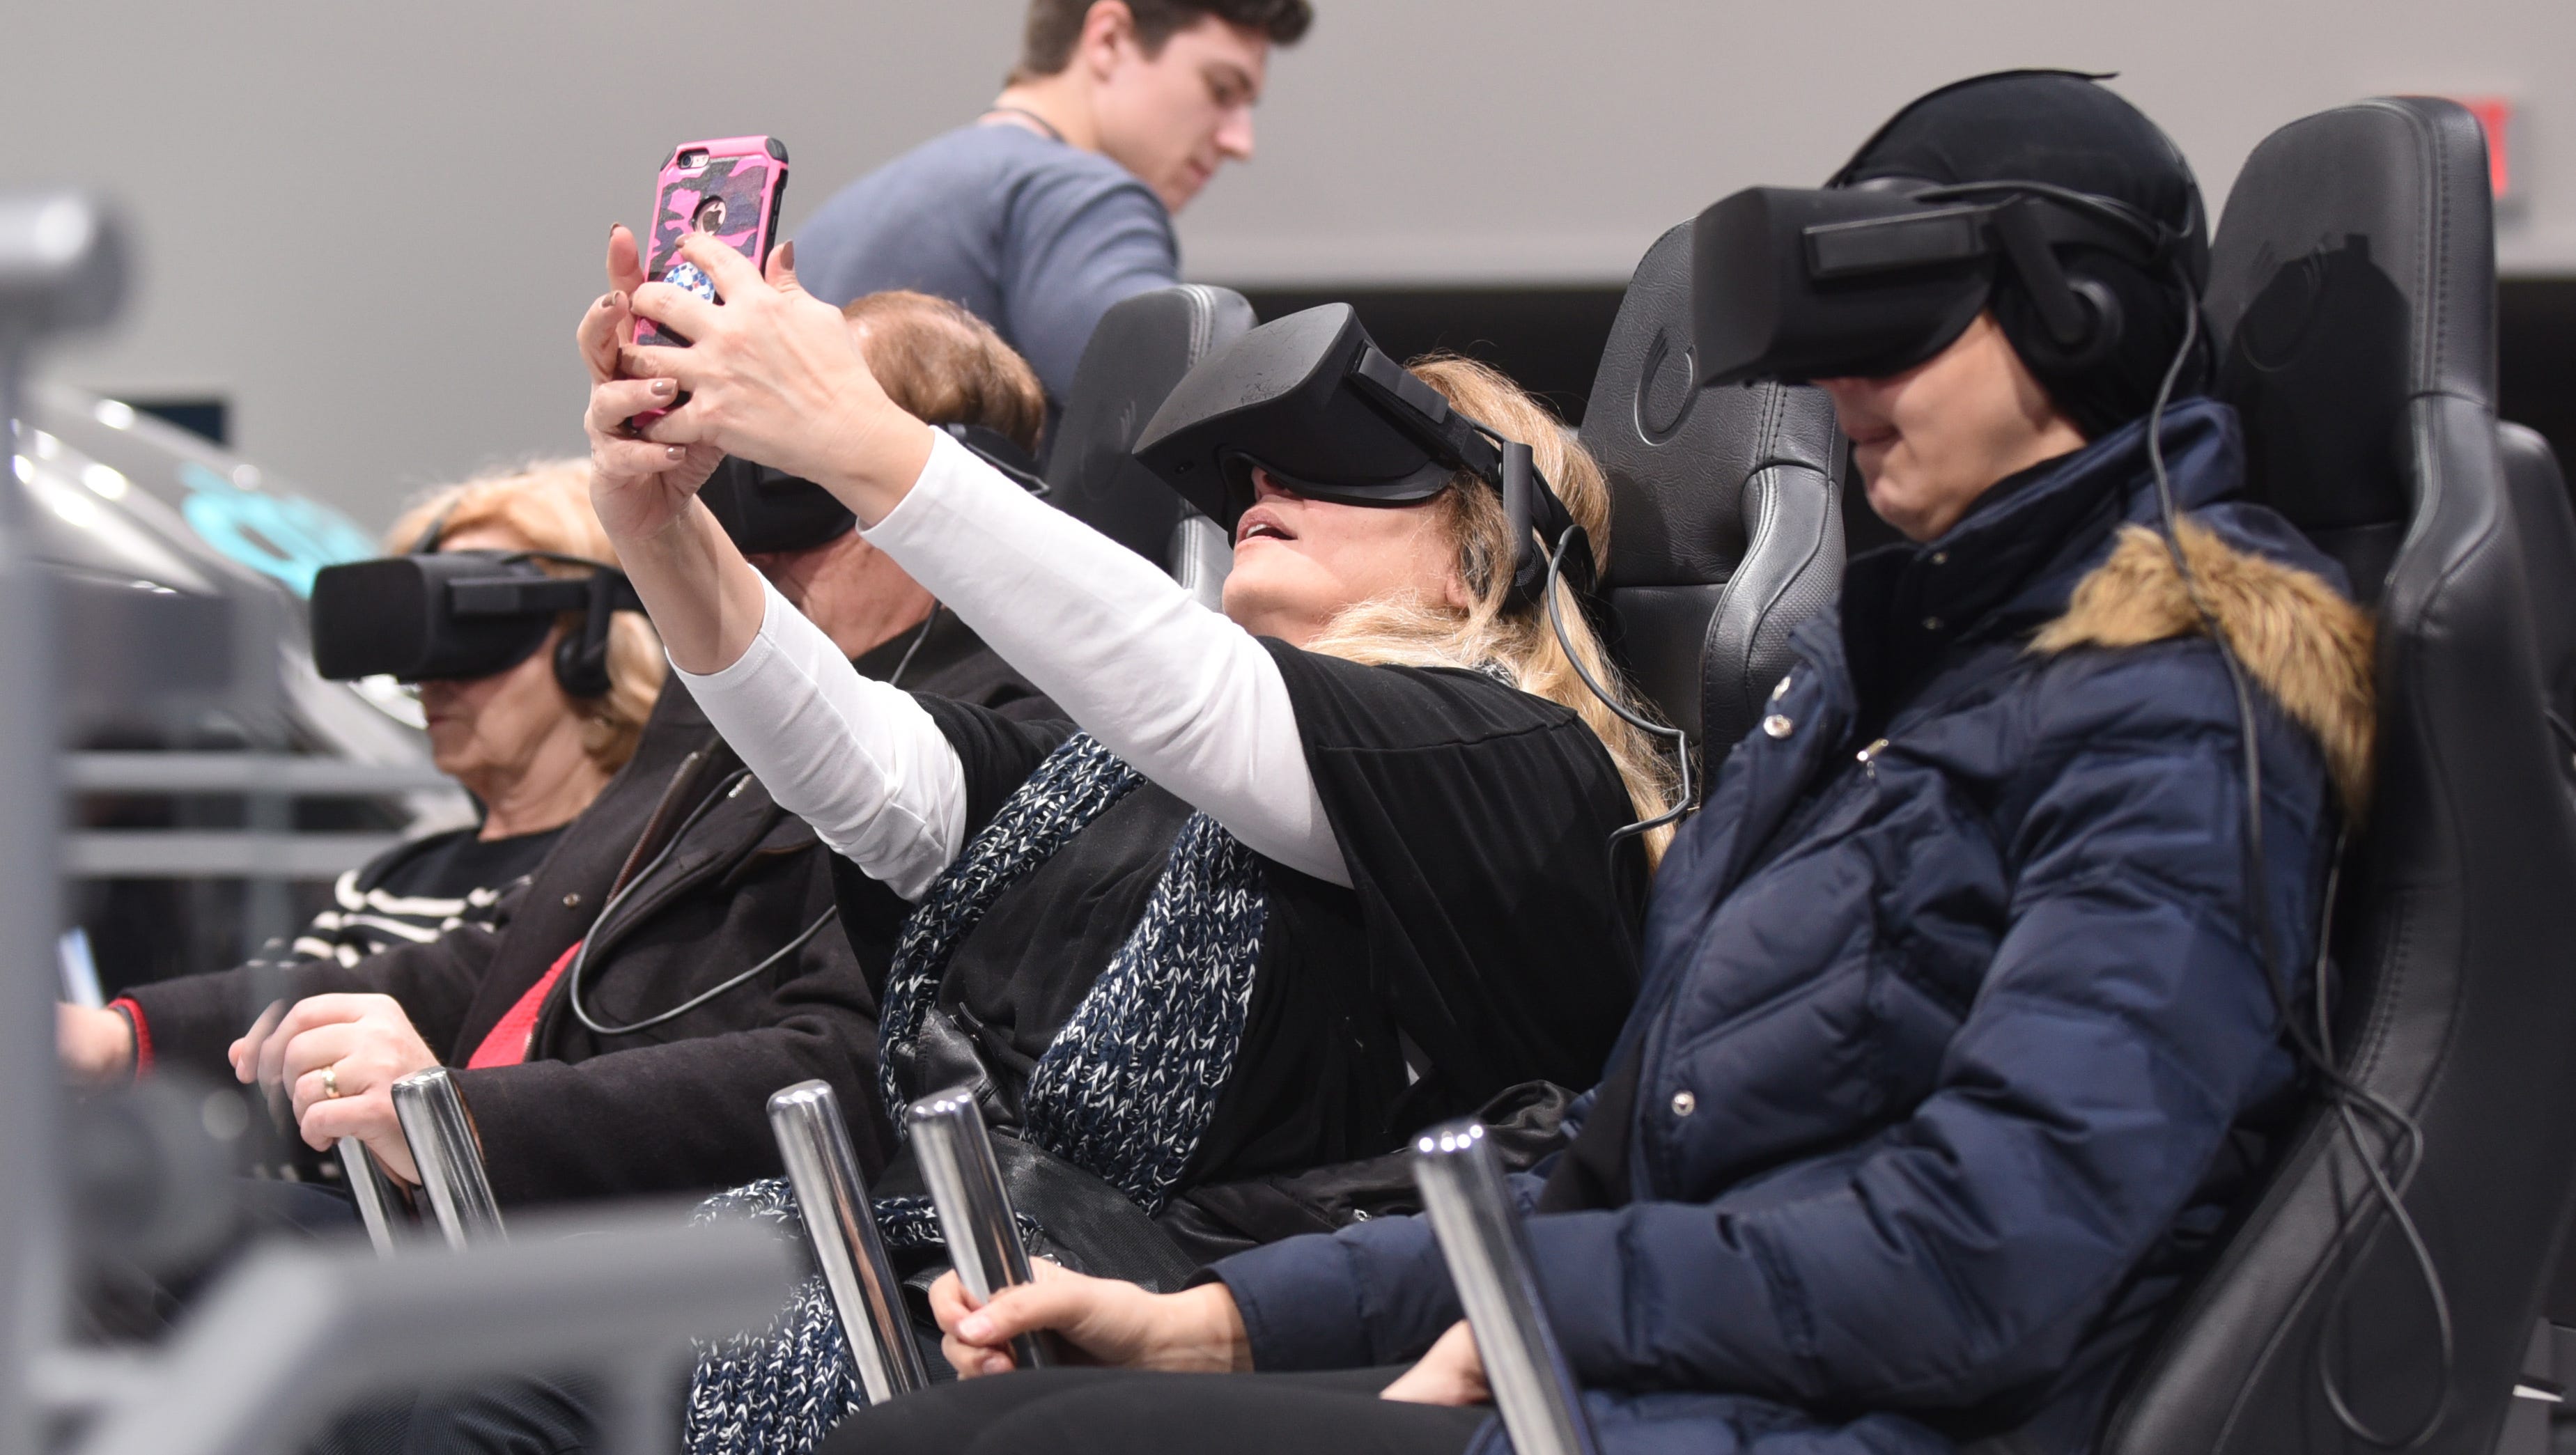 Alia Abourass, of Syria, dons a headset and takes a selfie during the Ford Motor Company's Future Mobility VR Experience on Saturday January 20, 2018 for the first public day for the North American International Auto Show